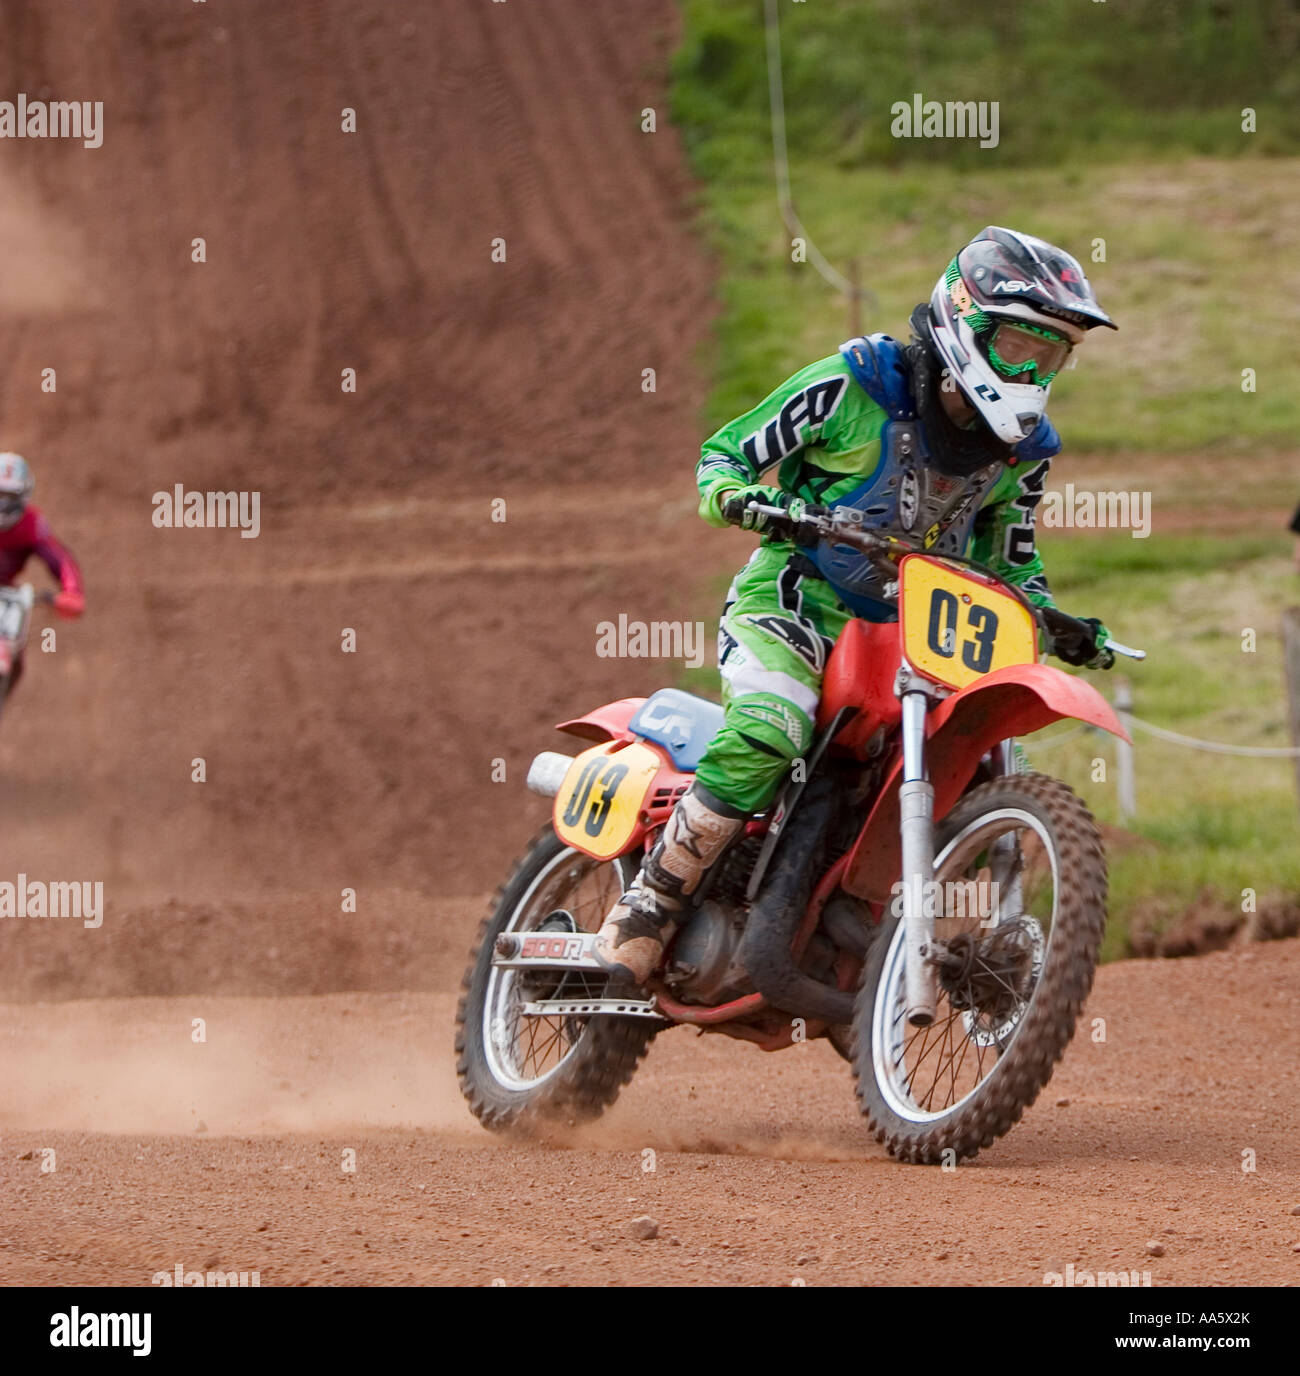 a motorcycle rider in a competition in the Uk called Motocross or scramble Stock Photo